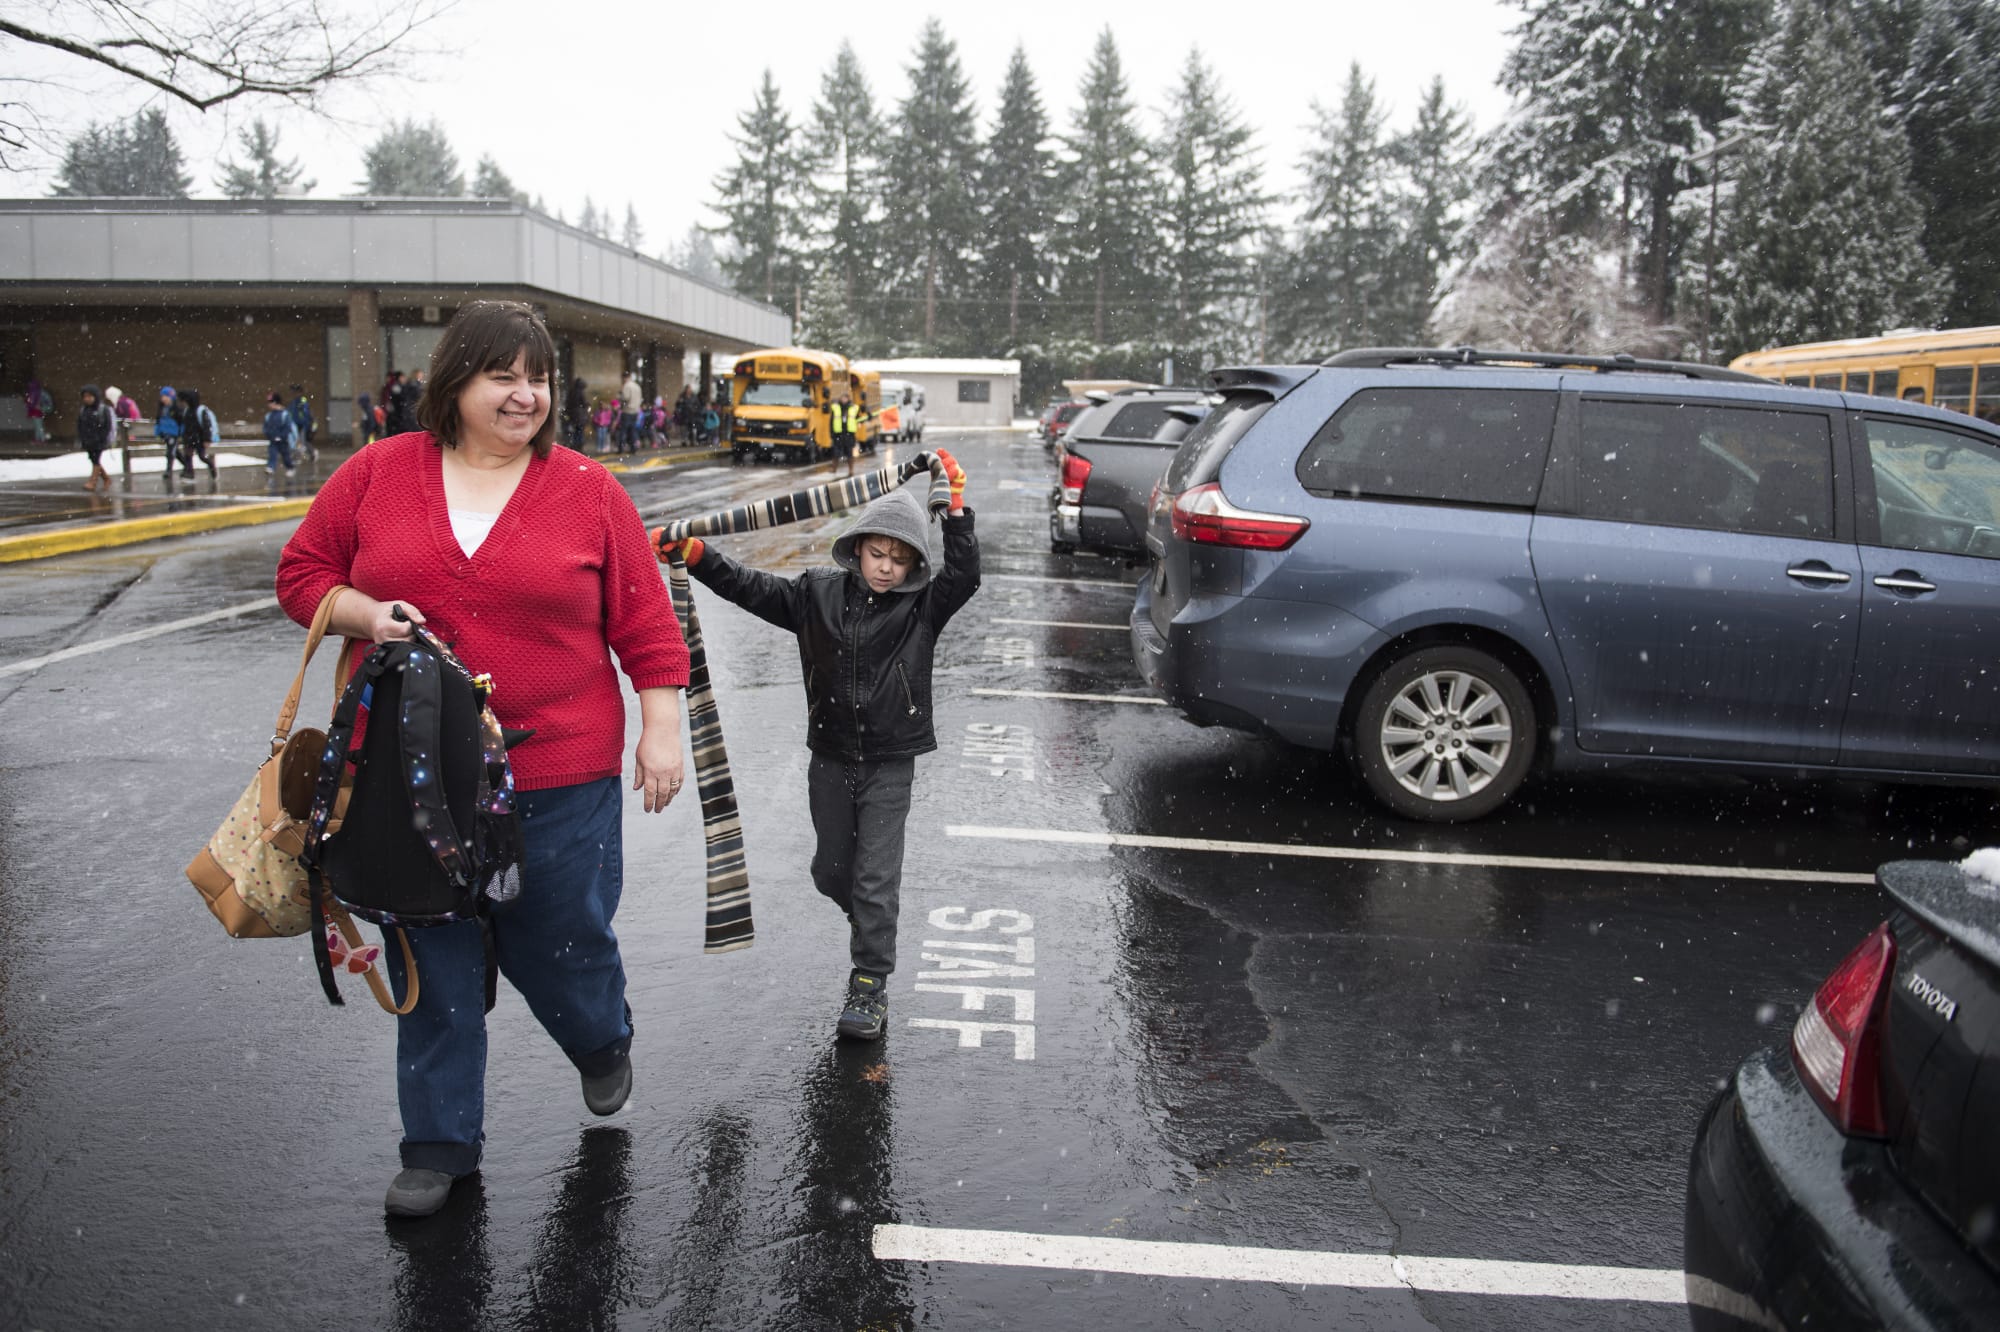 Jill Loveridge picks up her grandson Erik Lamb, 8, for early release at Pleasant Valley Primary School in Vancouver on Tuesday morning. Loveridge is a math teacher at Battle Ground High School and said her students couldn't contain their excitement. She started playing "Do you want to build a snowman?" for them as their classes started to let out earlier that morning.